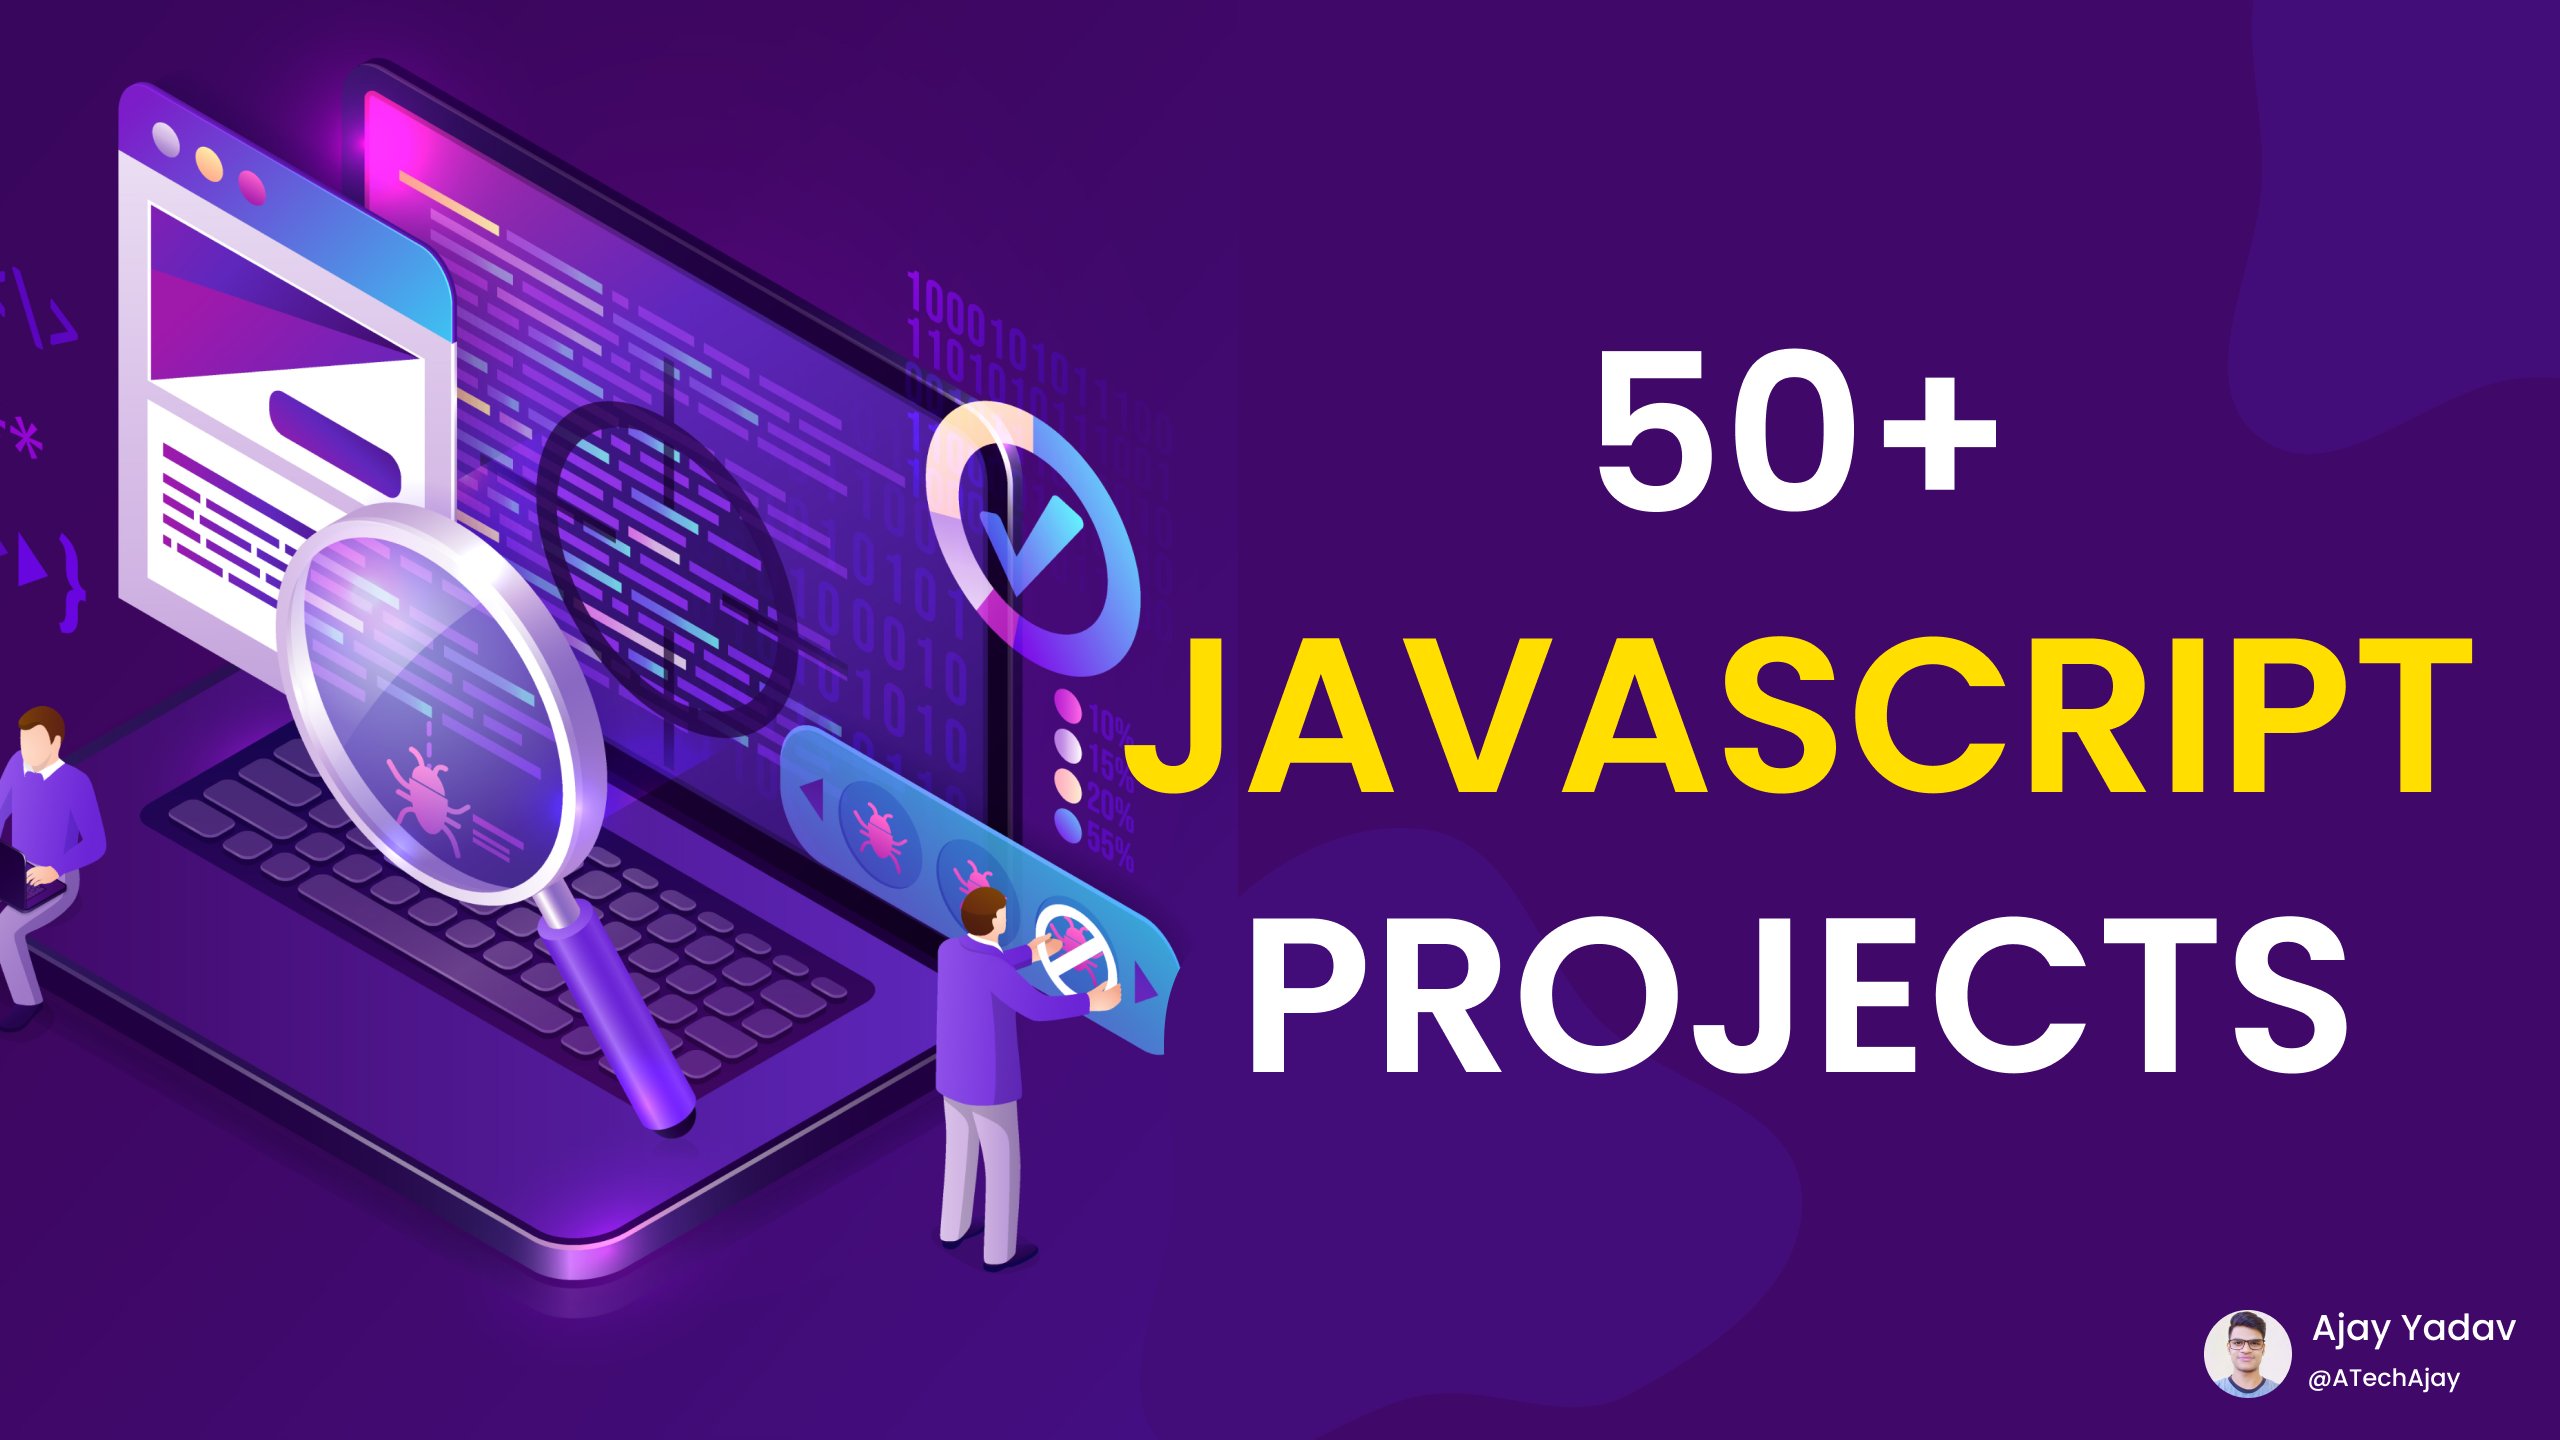 Build 50 awesome project using JavaScript